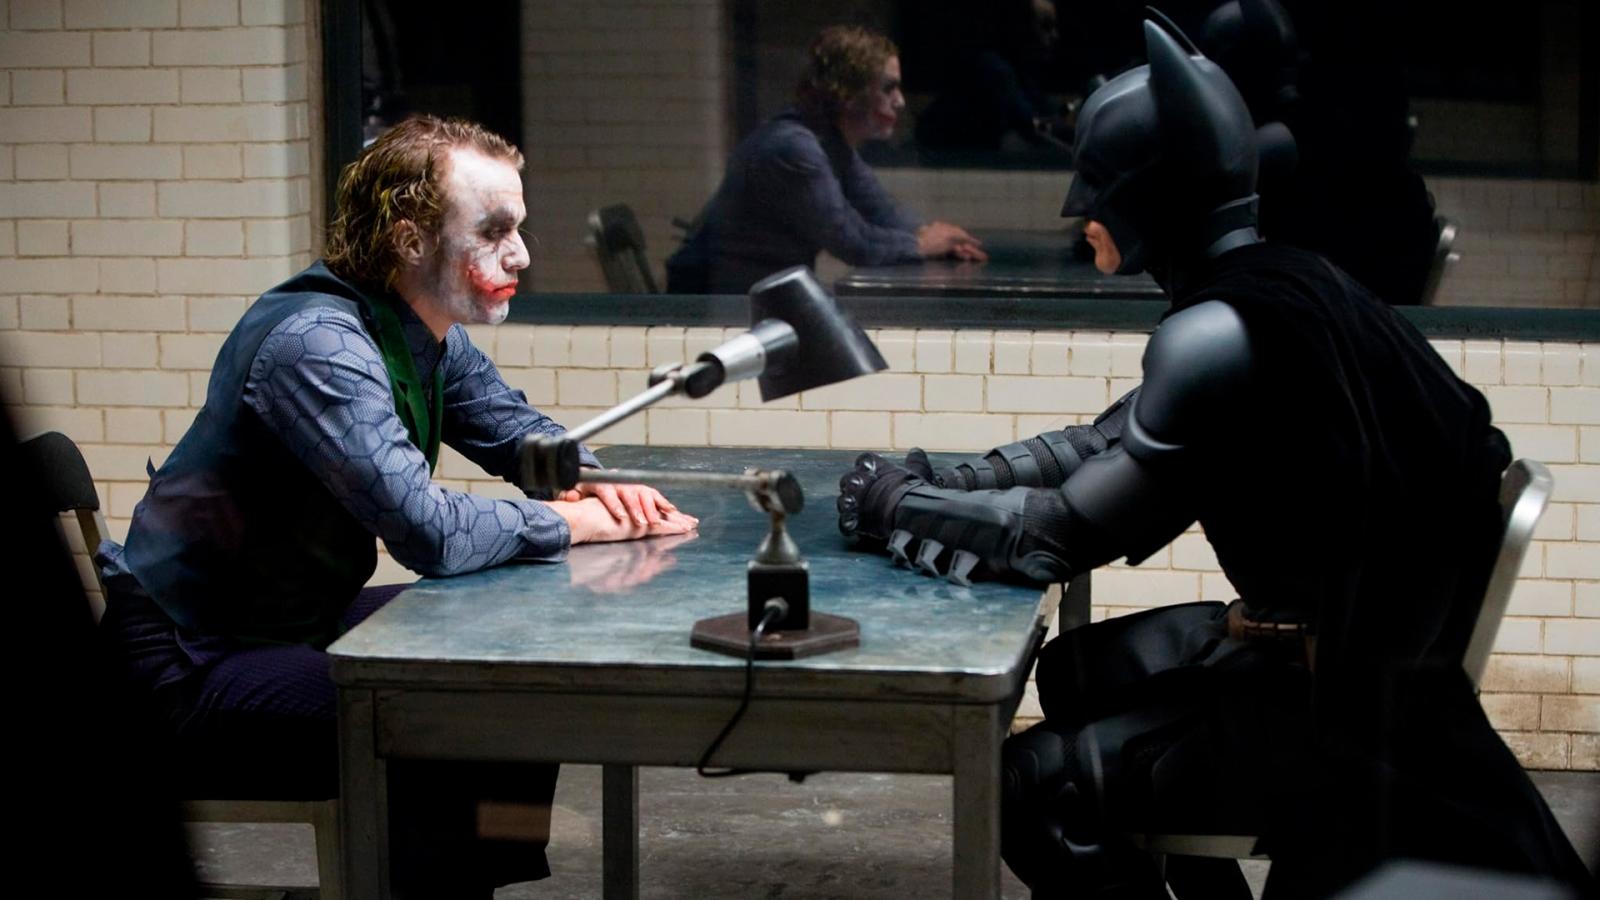 Who Dark Knight’s Joker Really Was? This Wild Theory Gives a Surprising Answer - image 2